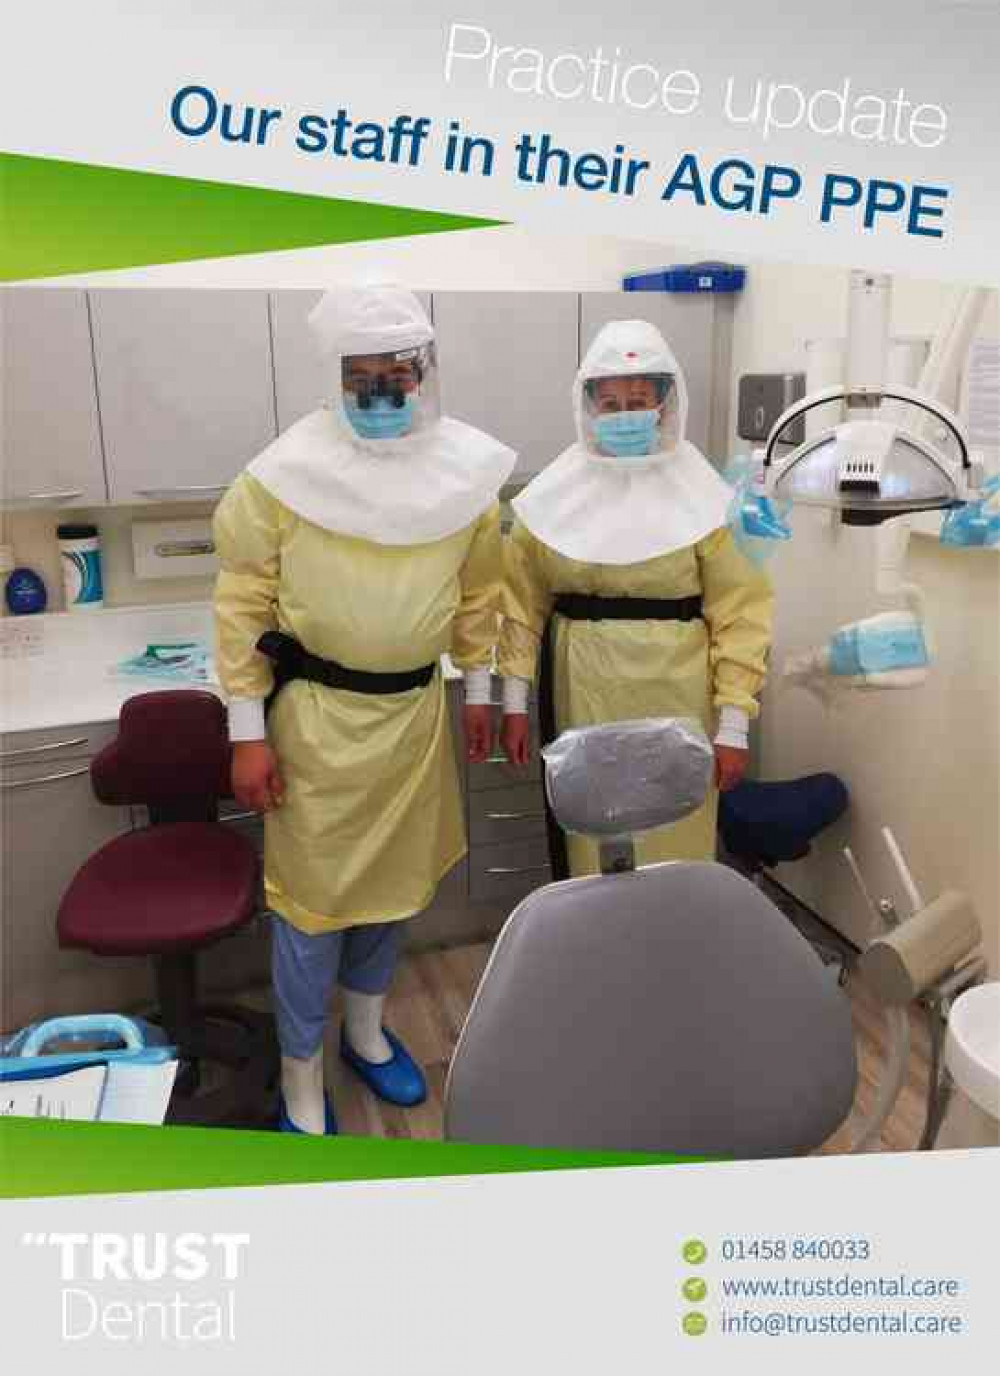 Dentist and nurse, James and Ali, in their reusable surgical gowns and powered respirator hoods, ready for their next patient